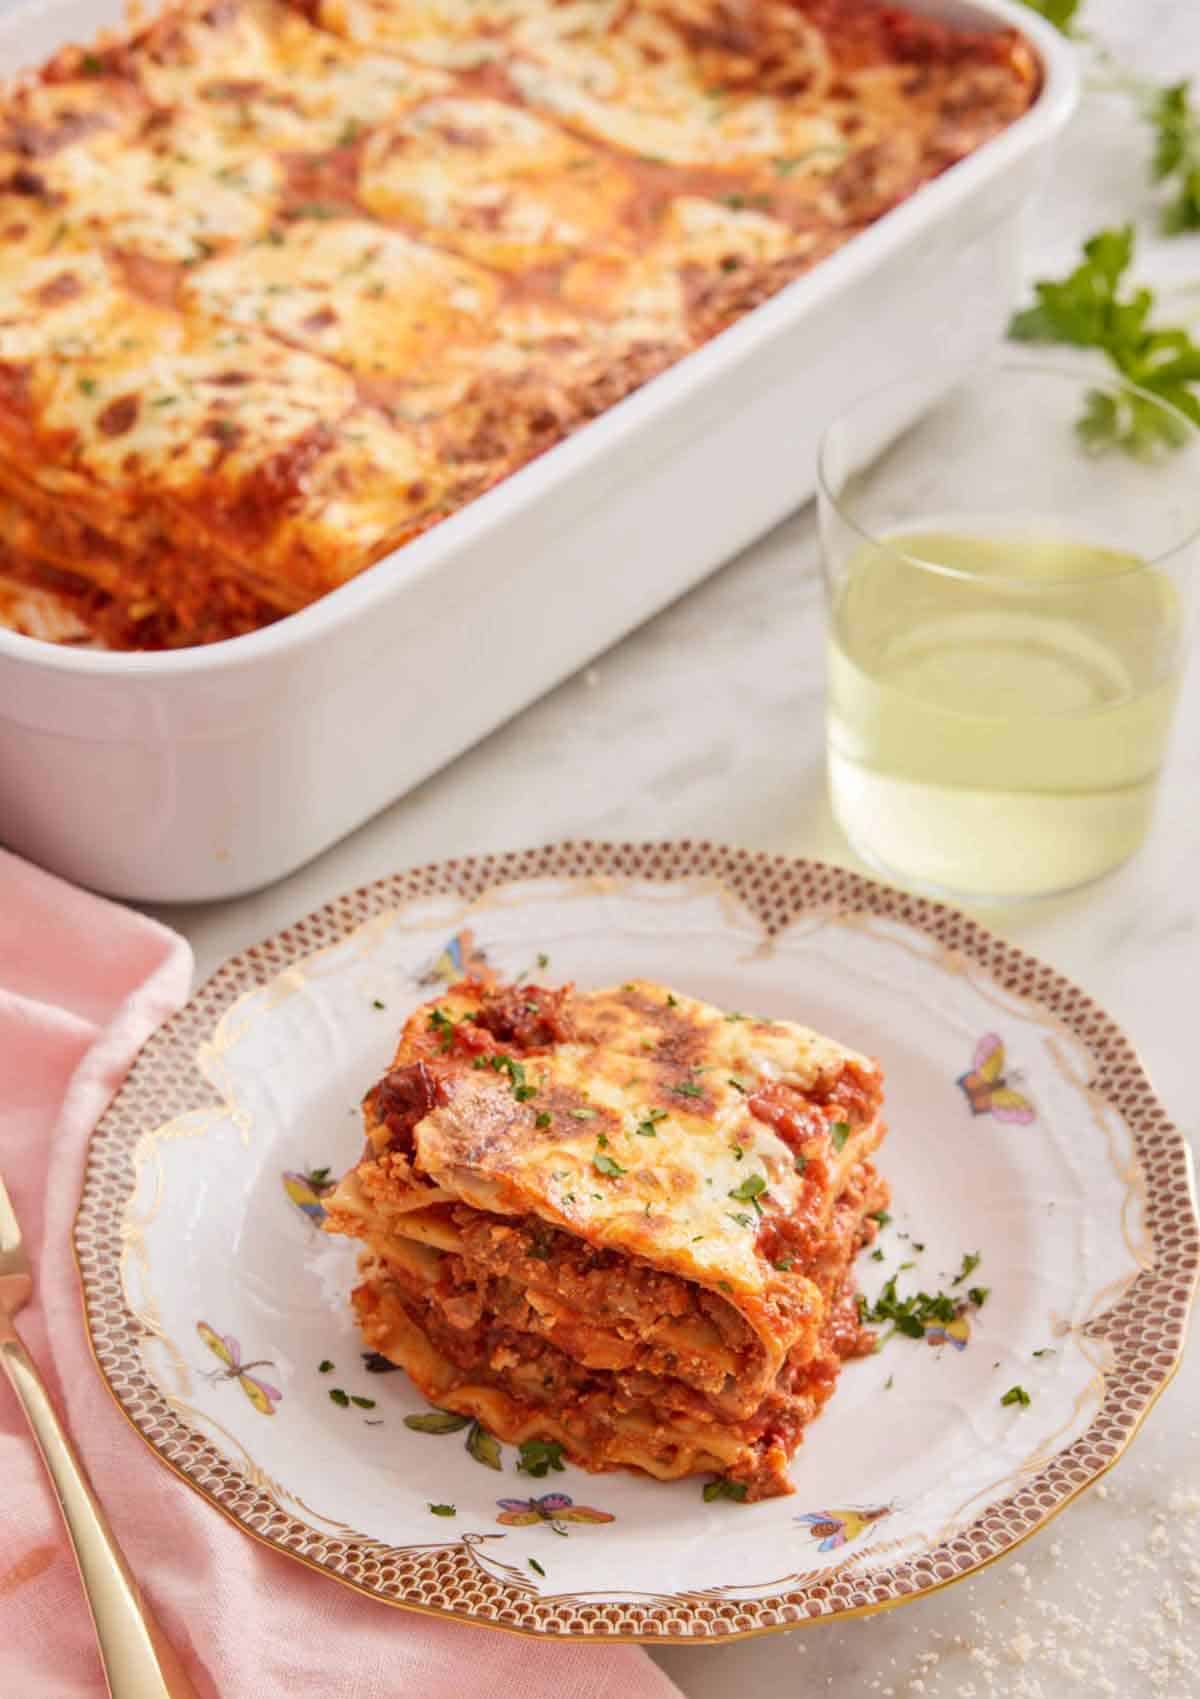 A slice of lasagna on a plate with a baking dish with the baked lasagna and a glass of wine in the background.